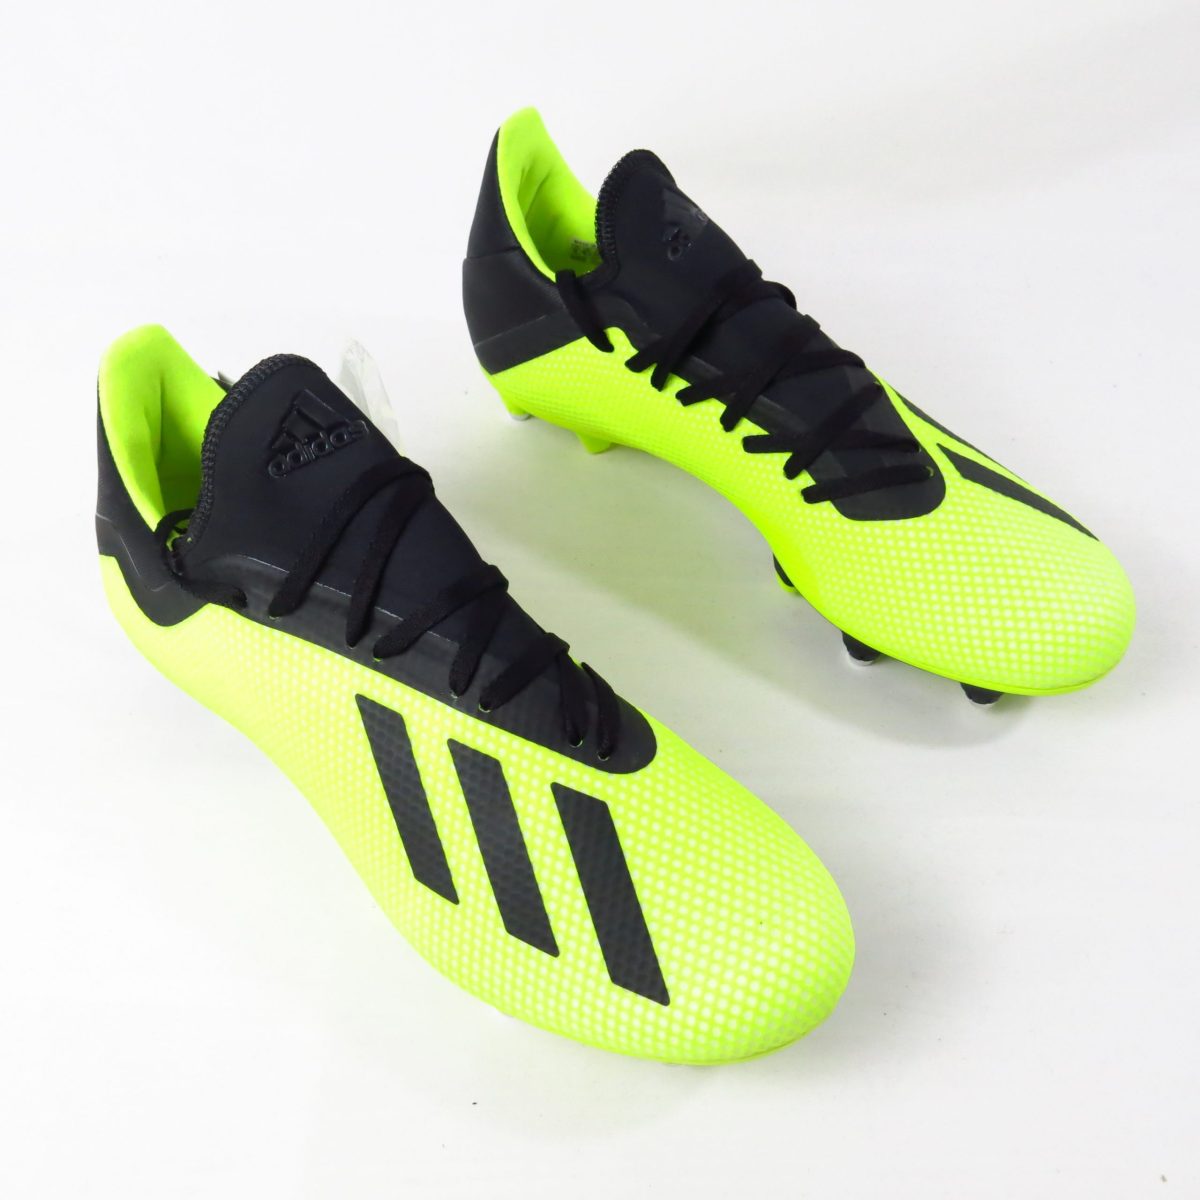 Adidas X 18.3 SG – AQ0710 – Football Boots | Old Firm Boots